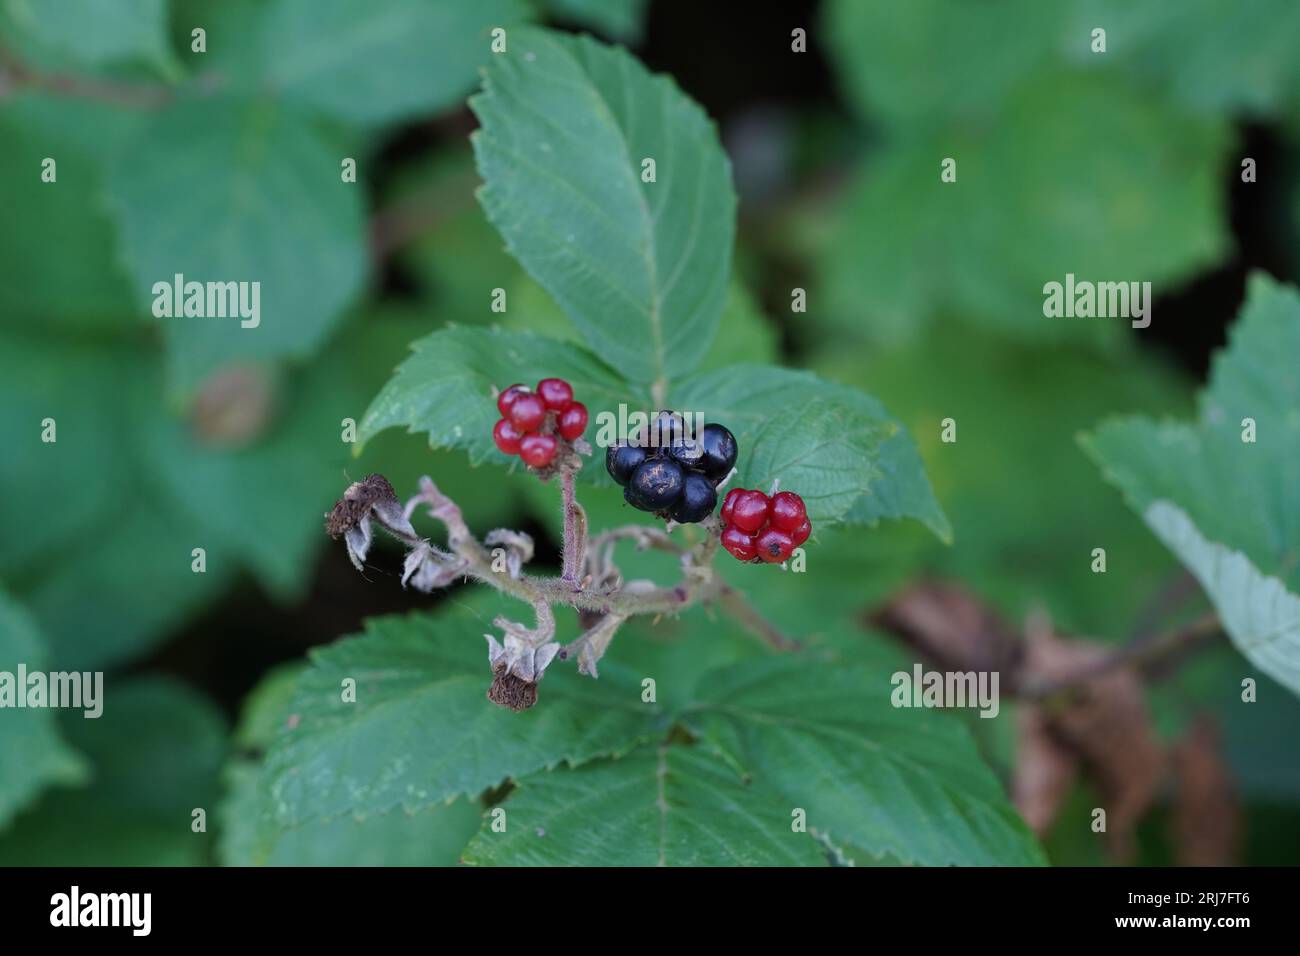 Cutout of a blackberry bush, in Latin it is genus Rubus, with some fruits in different colors. Stock Photo